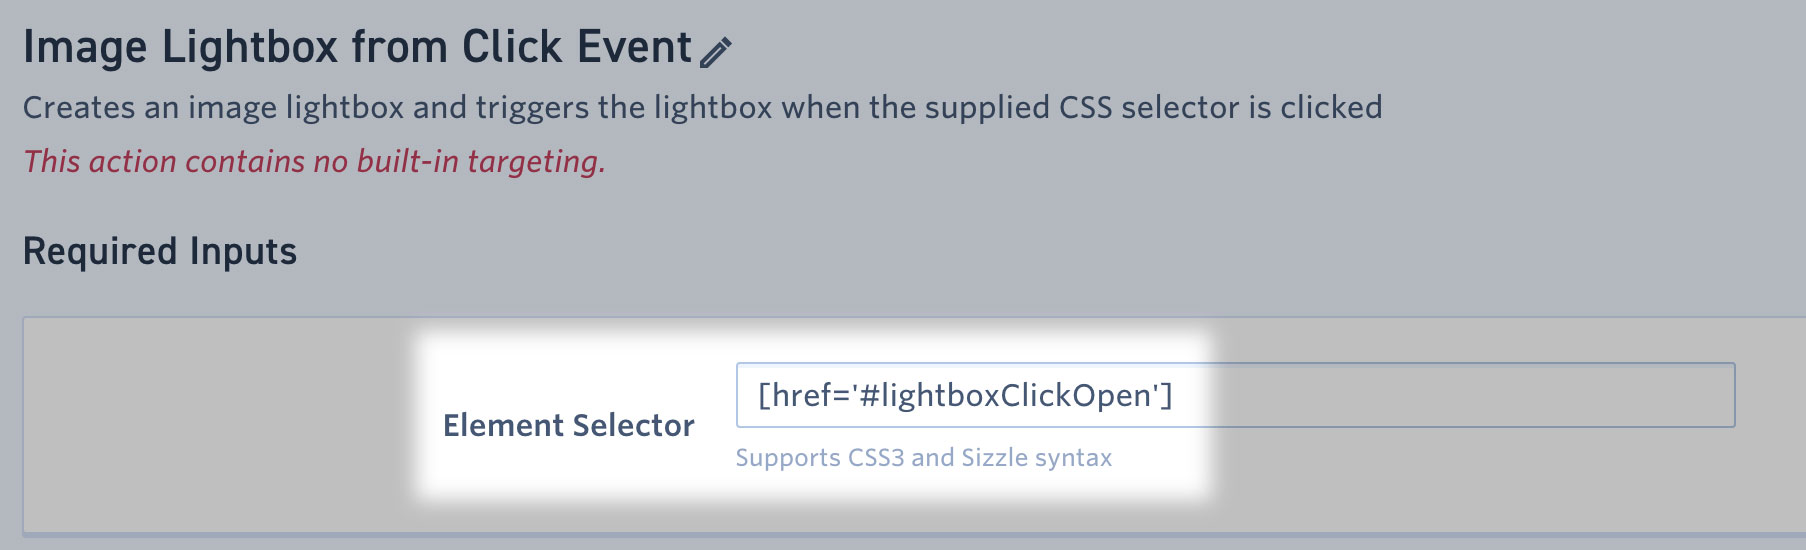 The 'Image Lightbox from Click Event' action template as seen in an old version of the Monetate user interface, with the 'Element Selector' field highlighted and with '[href='#lightboxClickOpen']' in that field